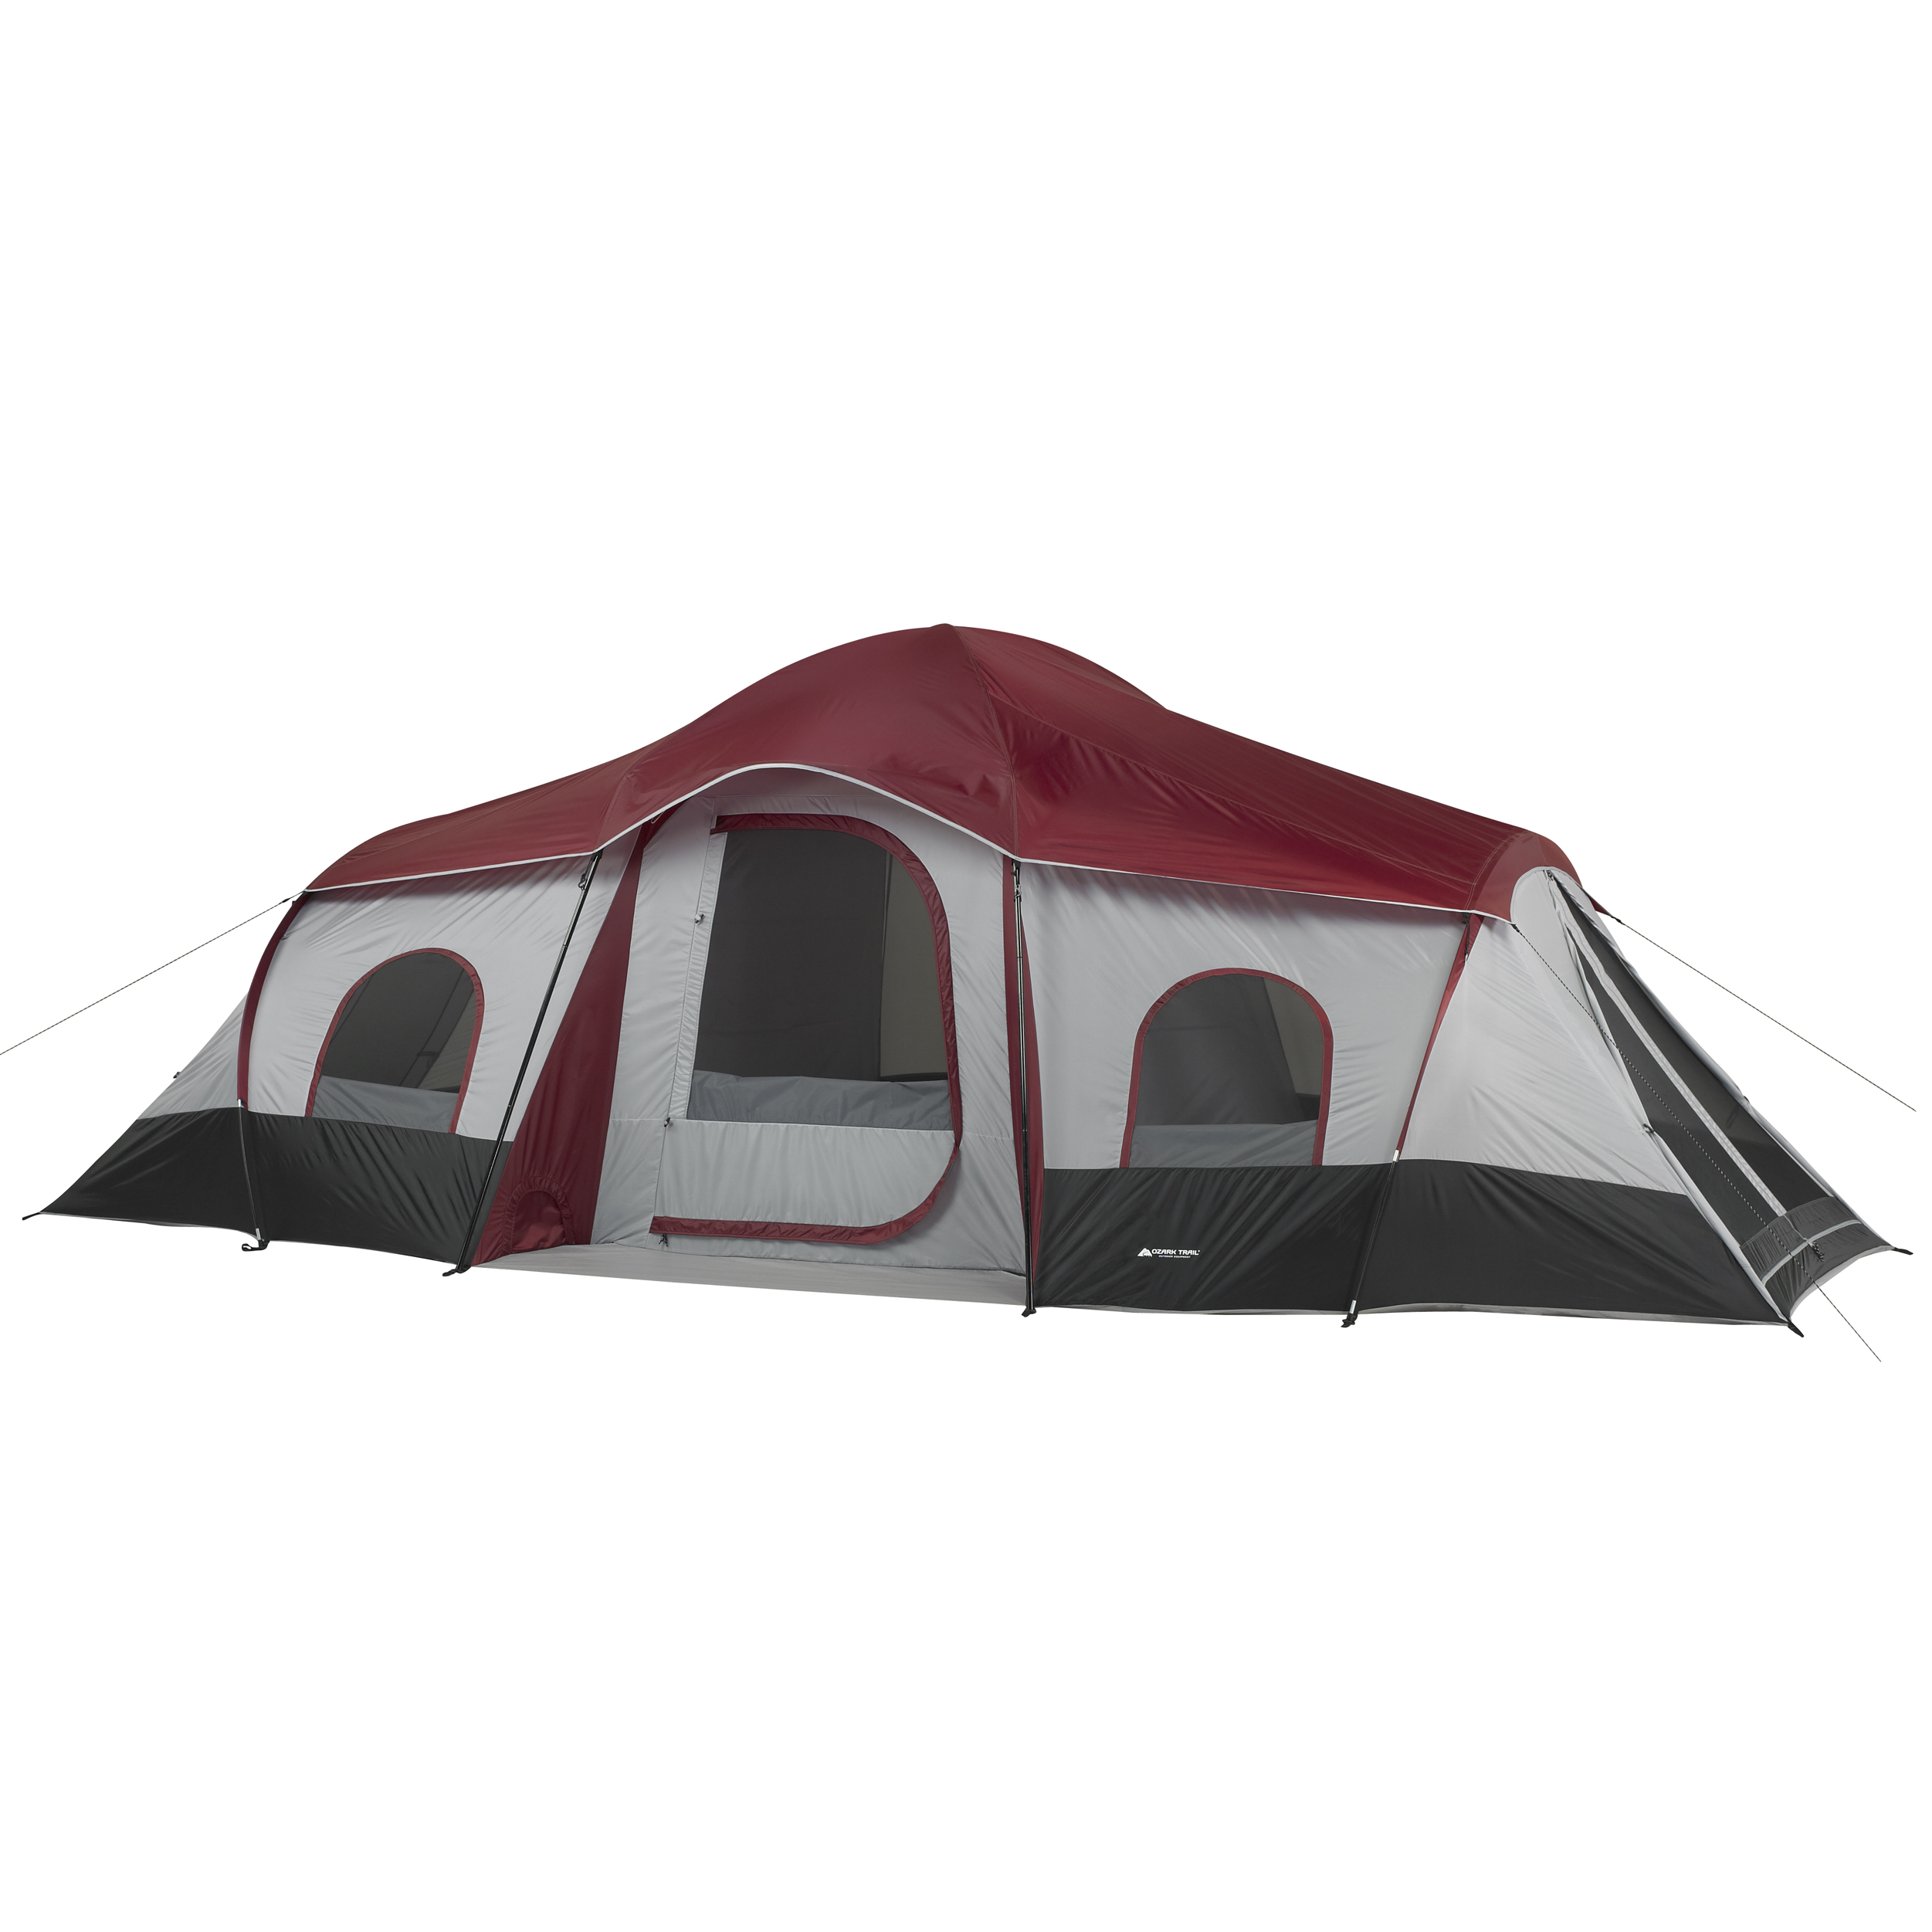 Ozark Trail 10-Person 3-Room Cabin Tent, with 2 Side Entrances - image 1 of 21